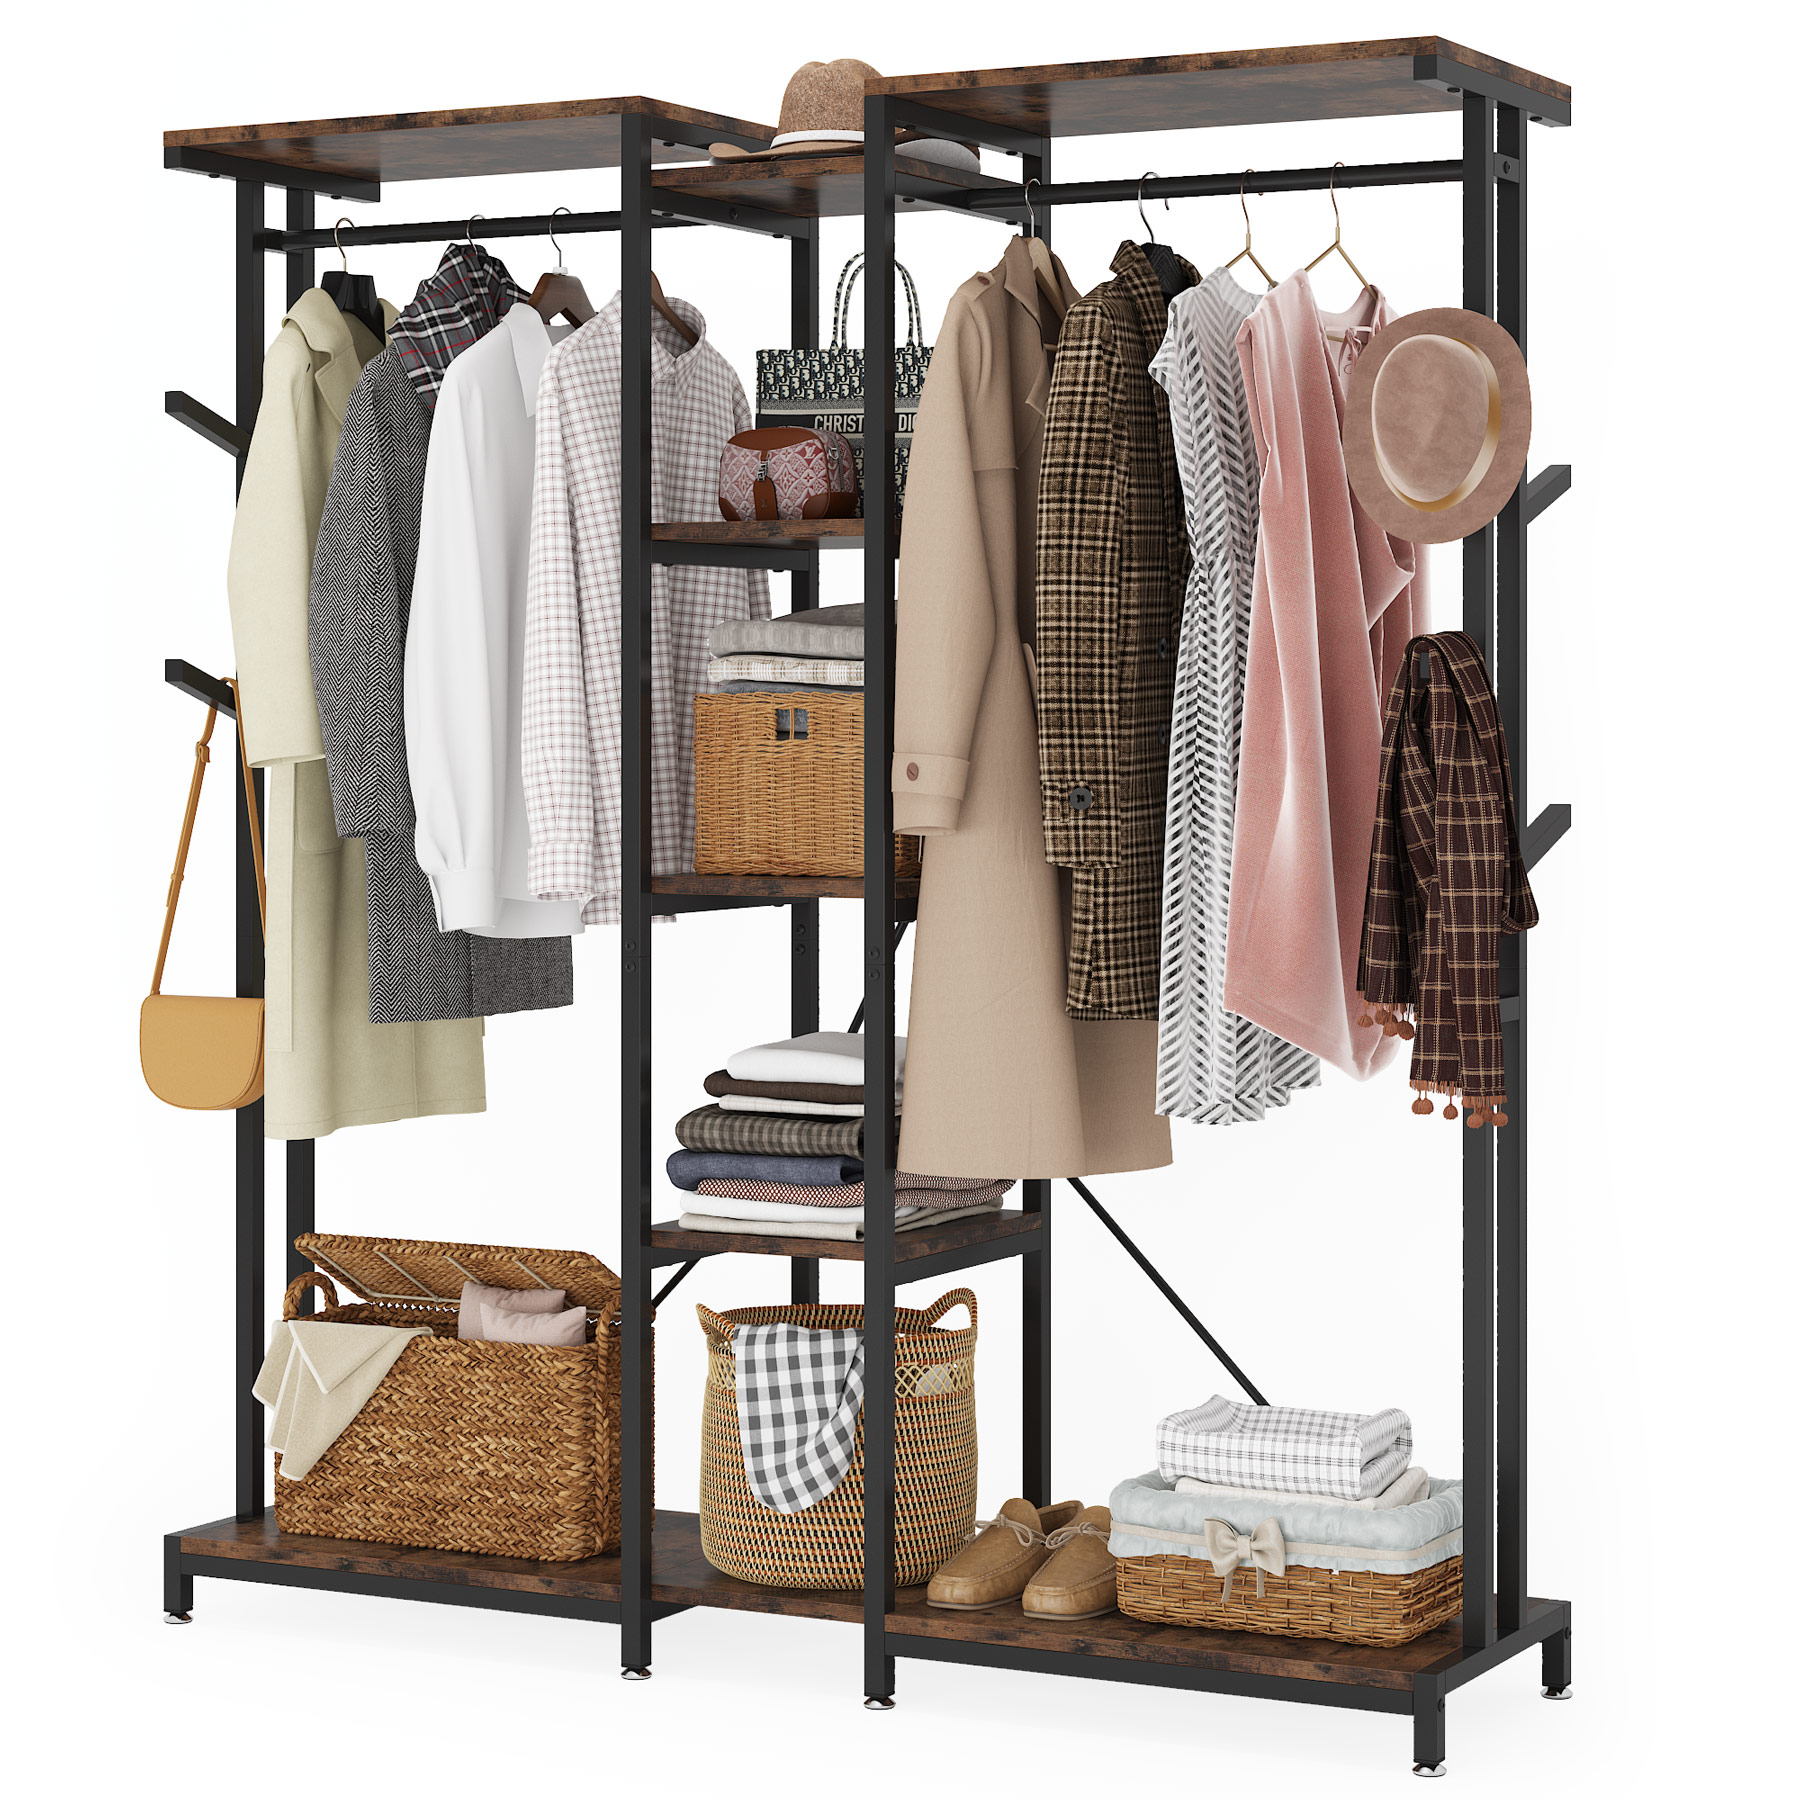 LITTLE TREE Free-standing Closet Organizer, Heavy Duty Clothes Closet,  Portable Garment Rack with 6-tier Shelves and Hanging rod, Black Metal  Frame 